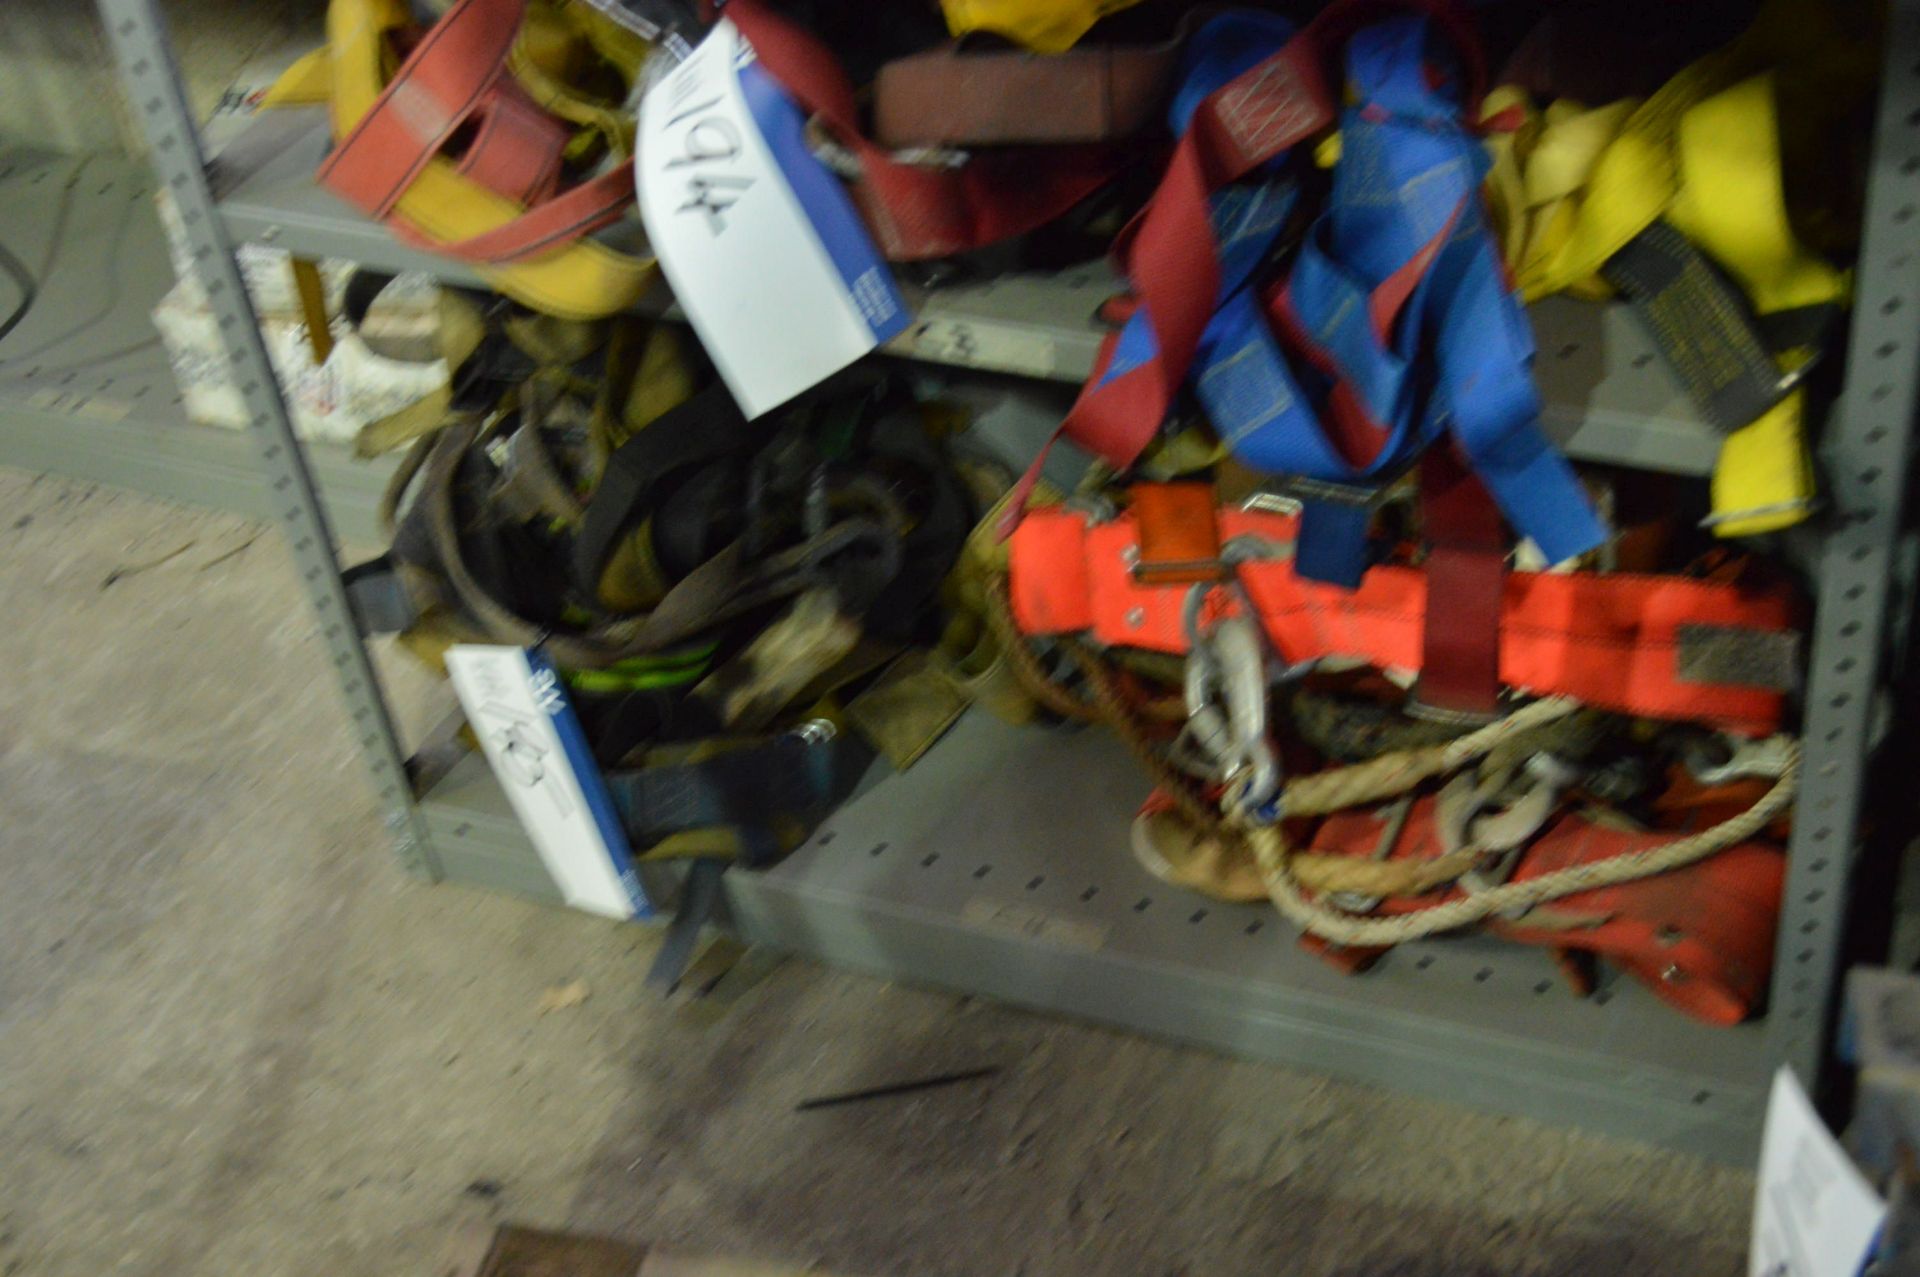 Assorted safety Harnesses, on one shelf of rack